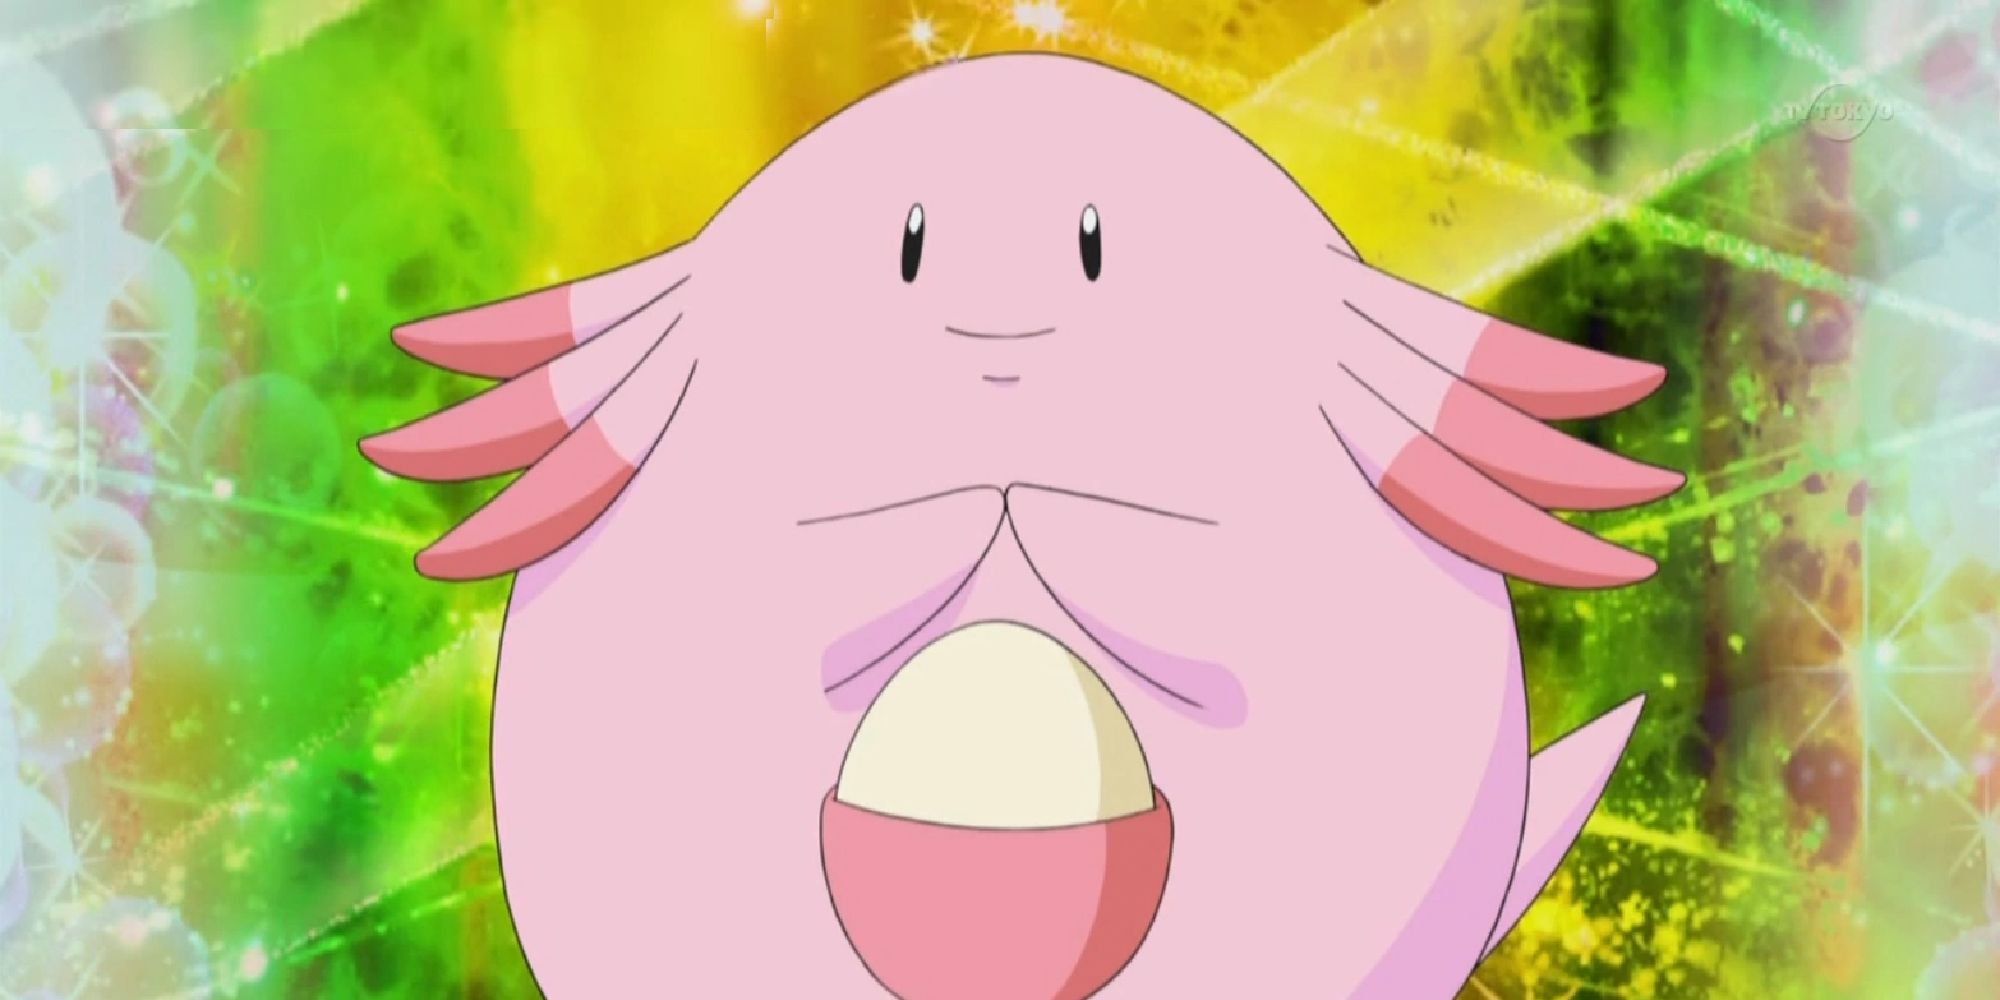 Chansey appearing in the Pokemon anime